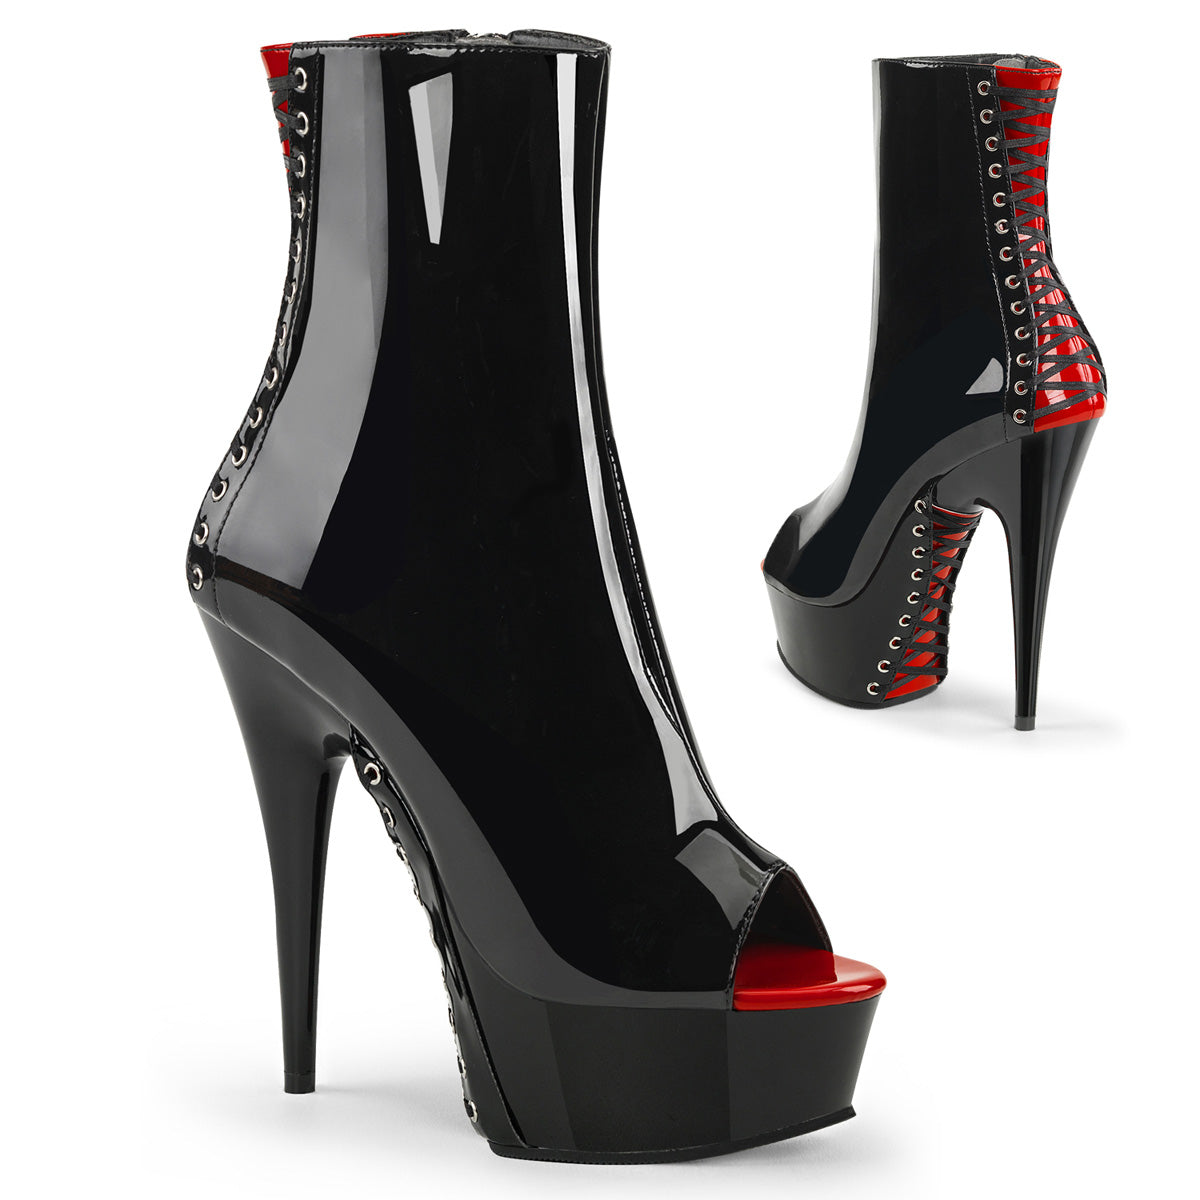 DELIGHT-1025 6" Heel Black and Red Pole Dancing Platforms-Pleaser- Sexy Shoes